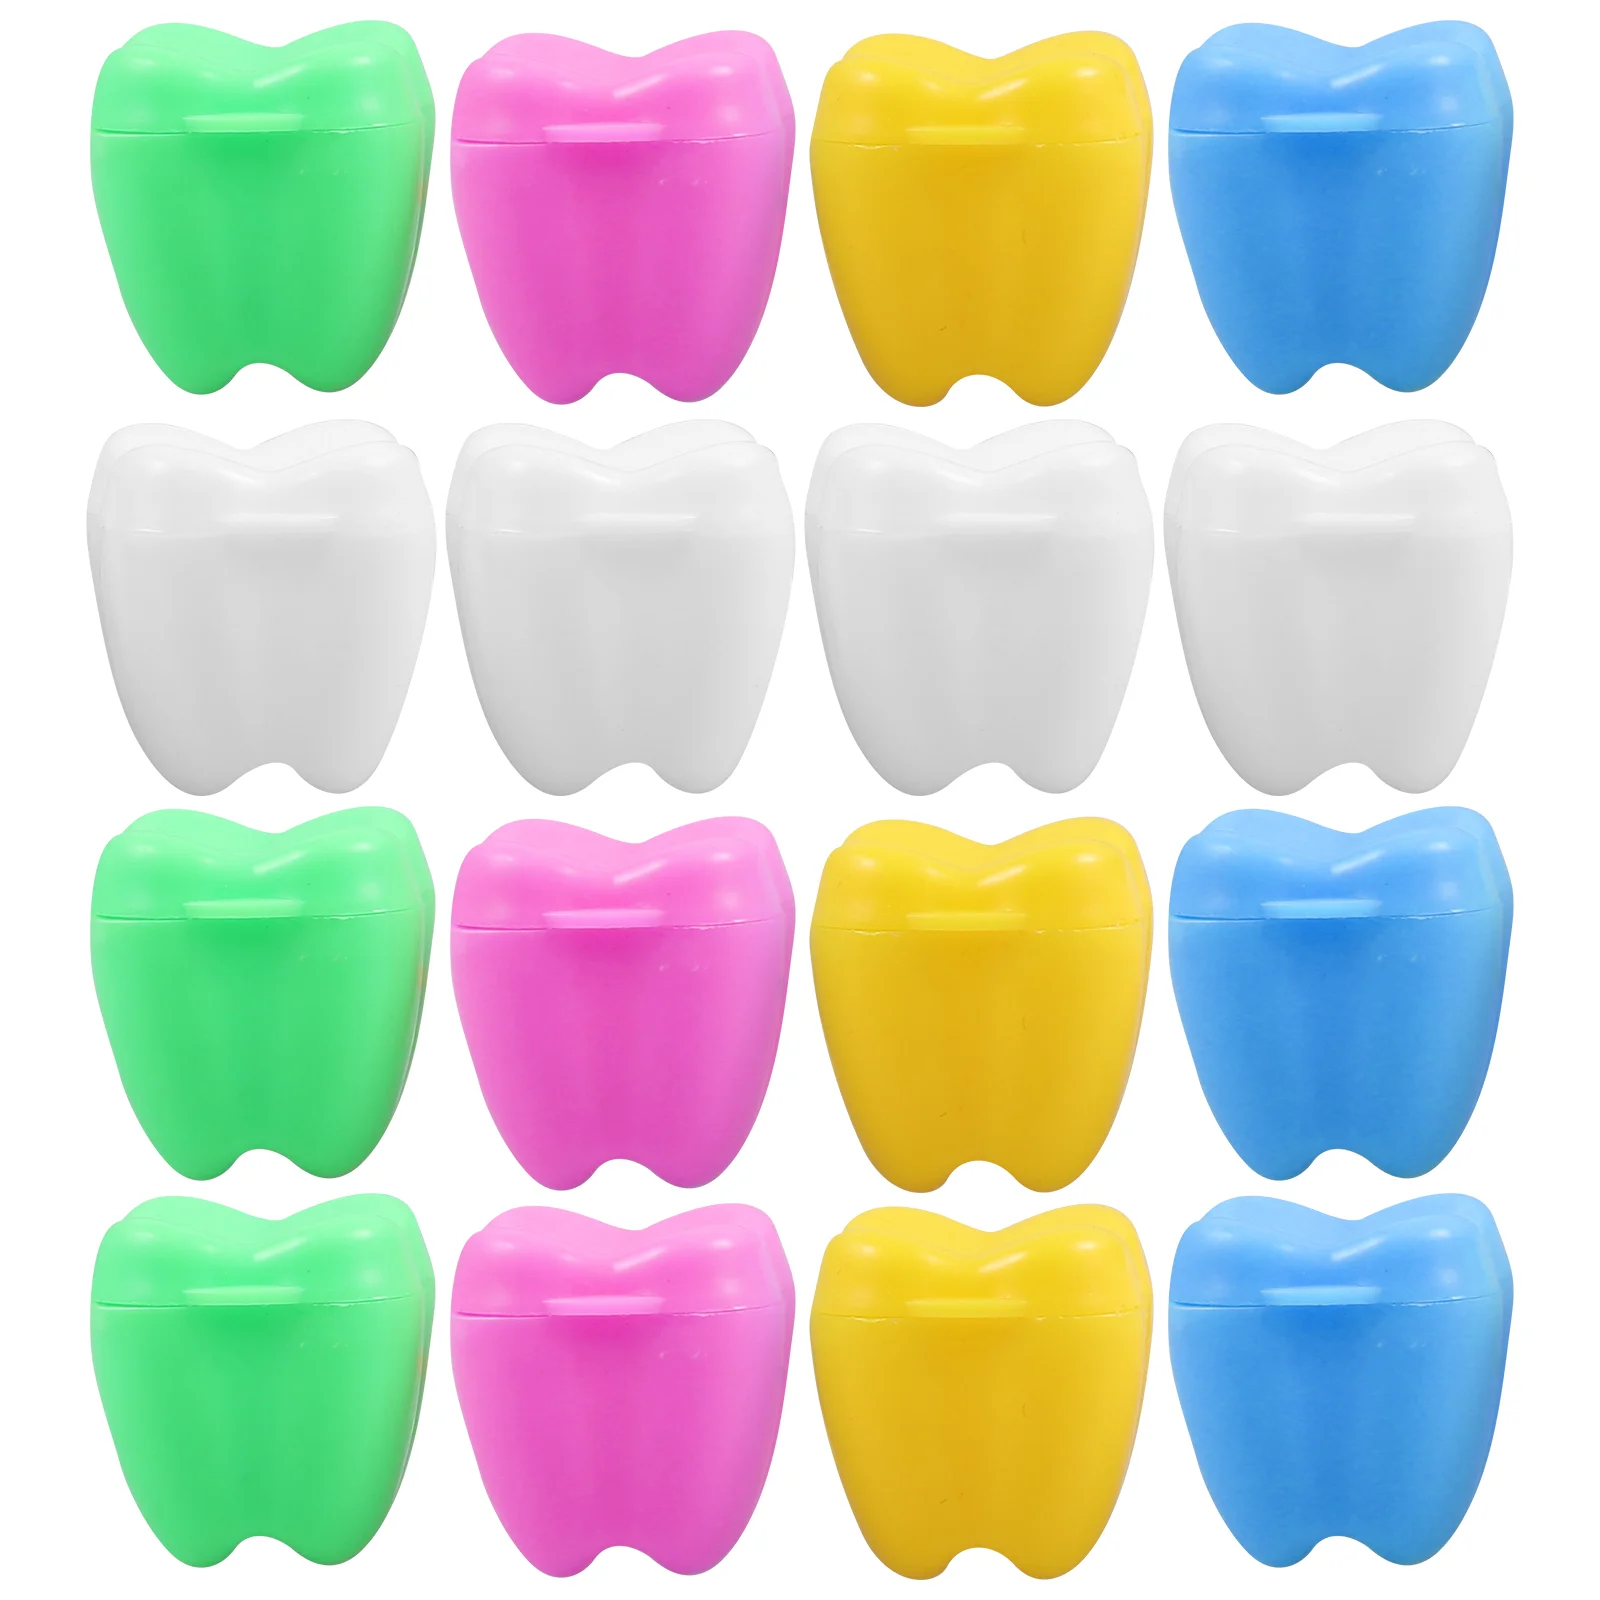 

12 Pcs Baby Teeth Storage Box Memorial Gift Tooth Container Deciduous Keepsake Case Toddler Plastic Newborn Infant Lost